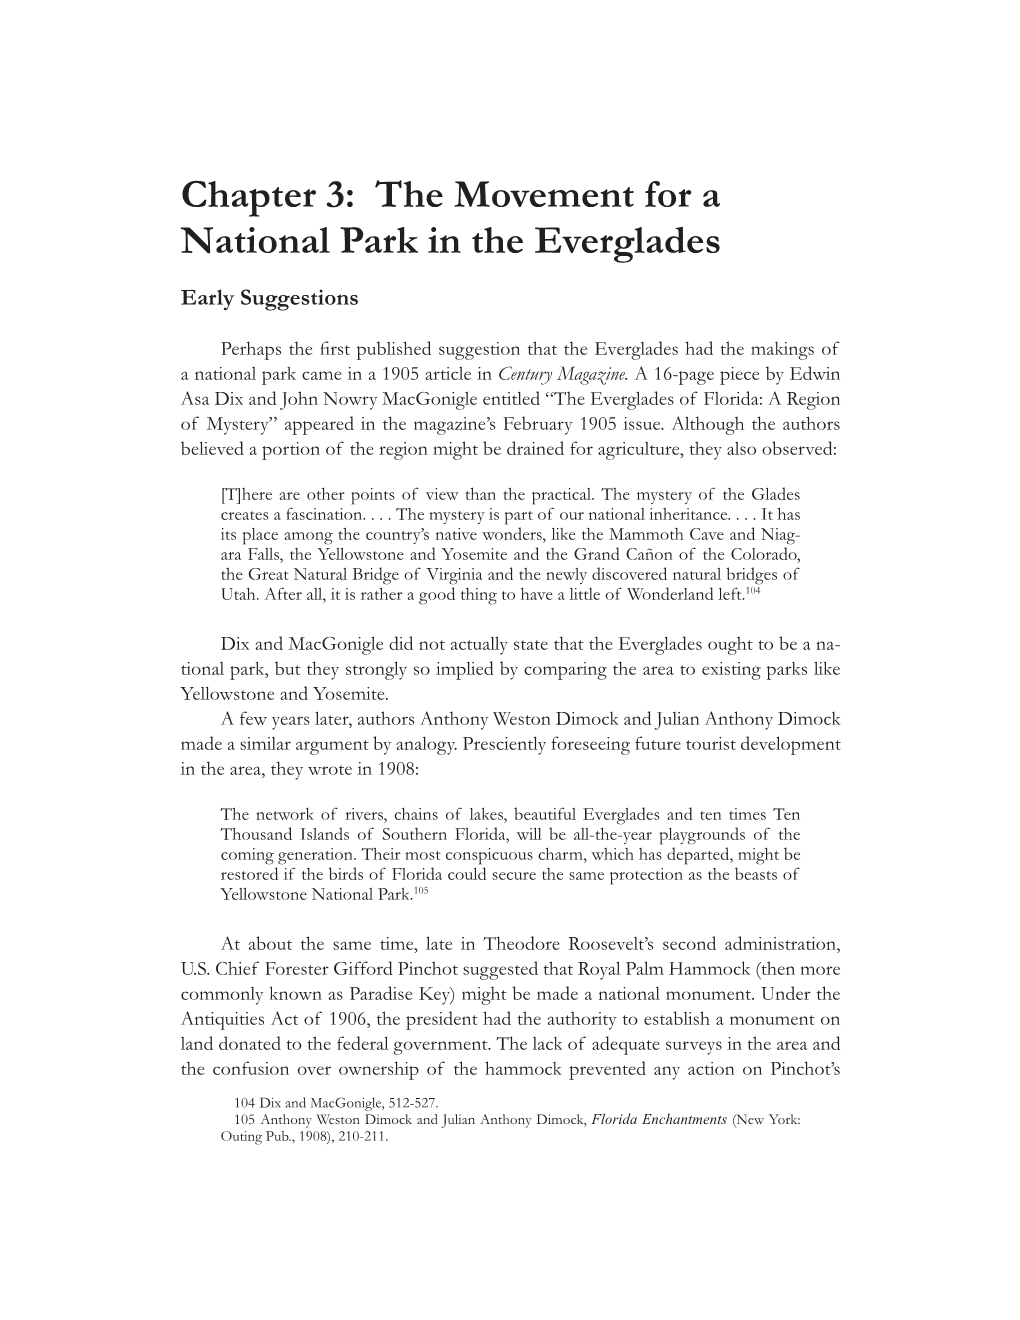 Chapter 3: the Movement for a National Park in the Everglades Early Suggestions